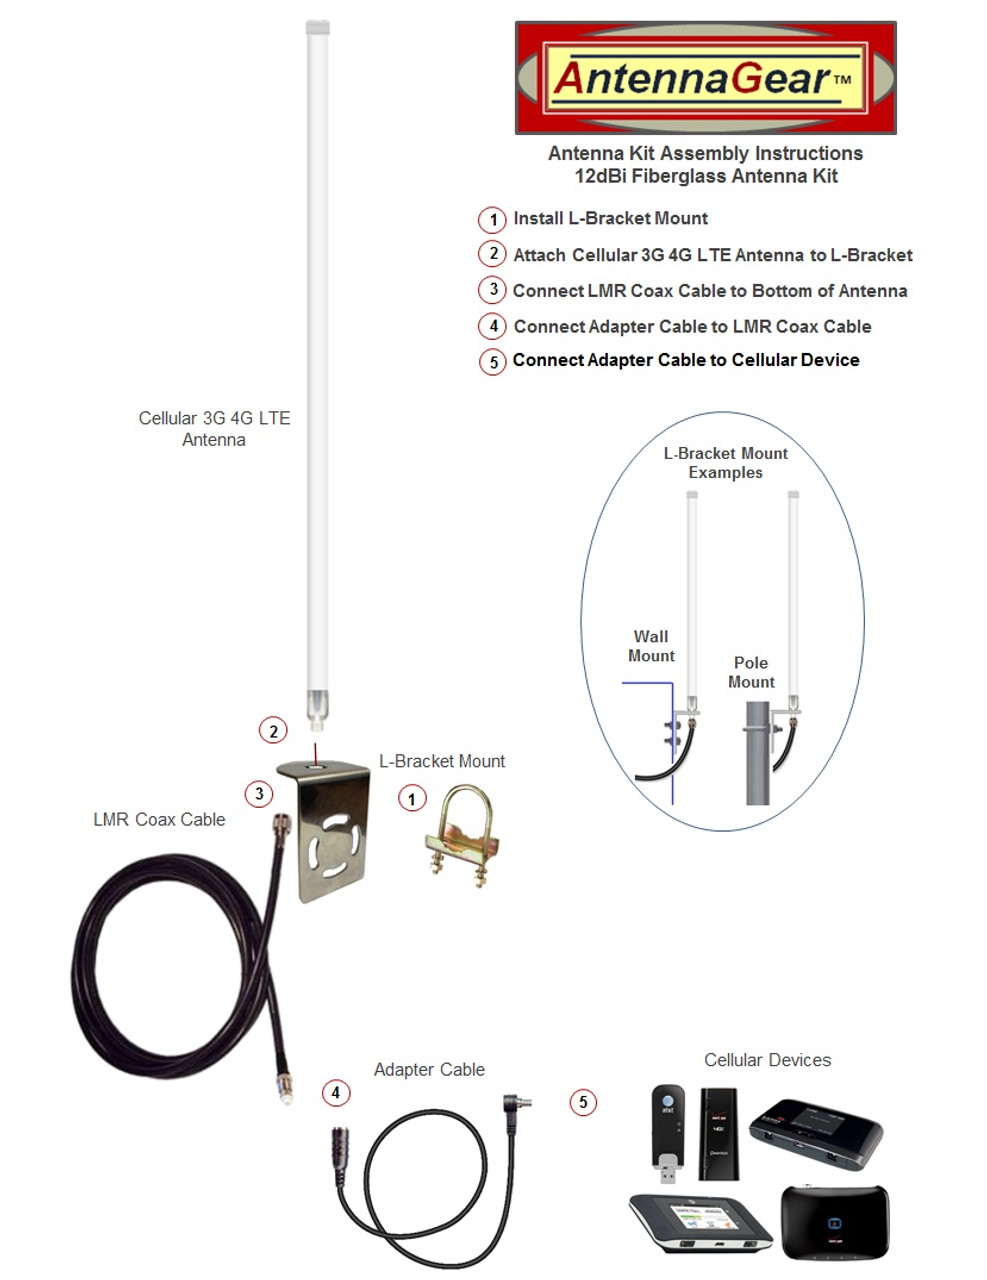 12dB Fiberglass 4G LTE XLTE Antenna Kit For Inseego SKYUS-140SV Gateway w/ Cable Length Options